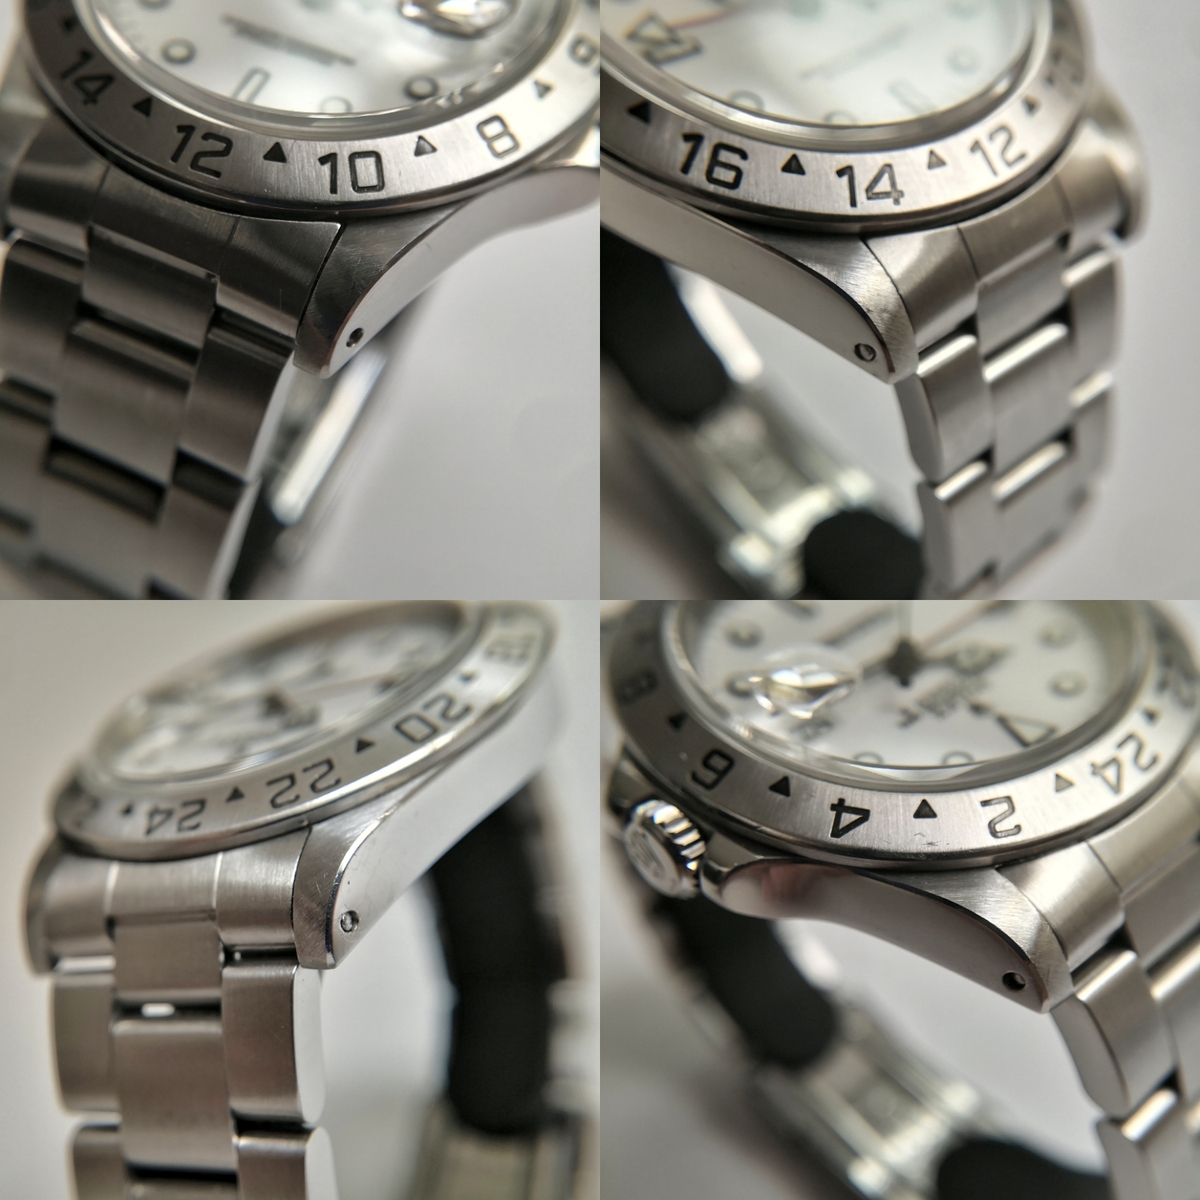 16570 Swiss Only